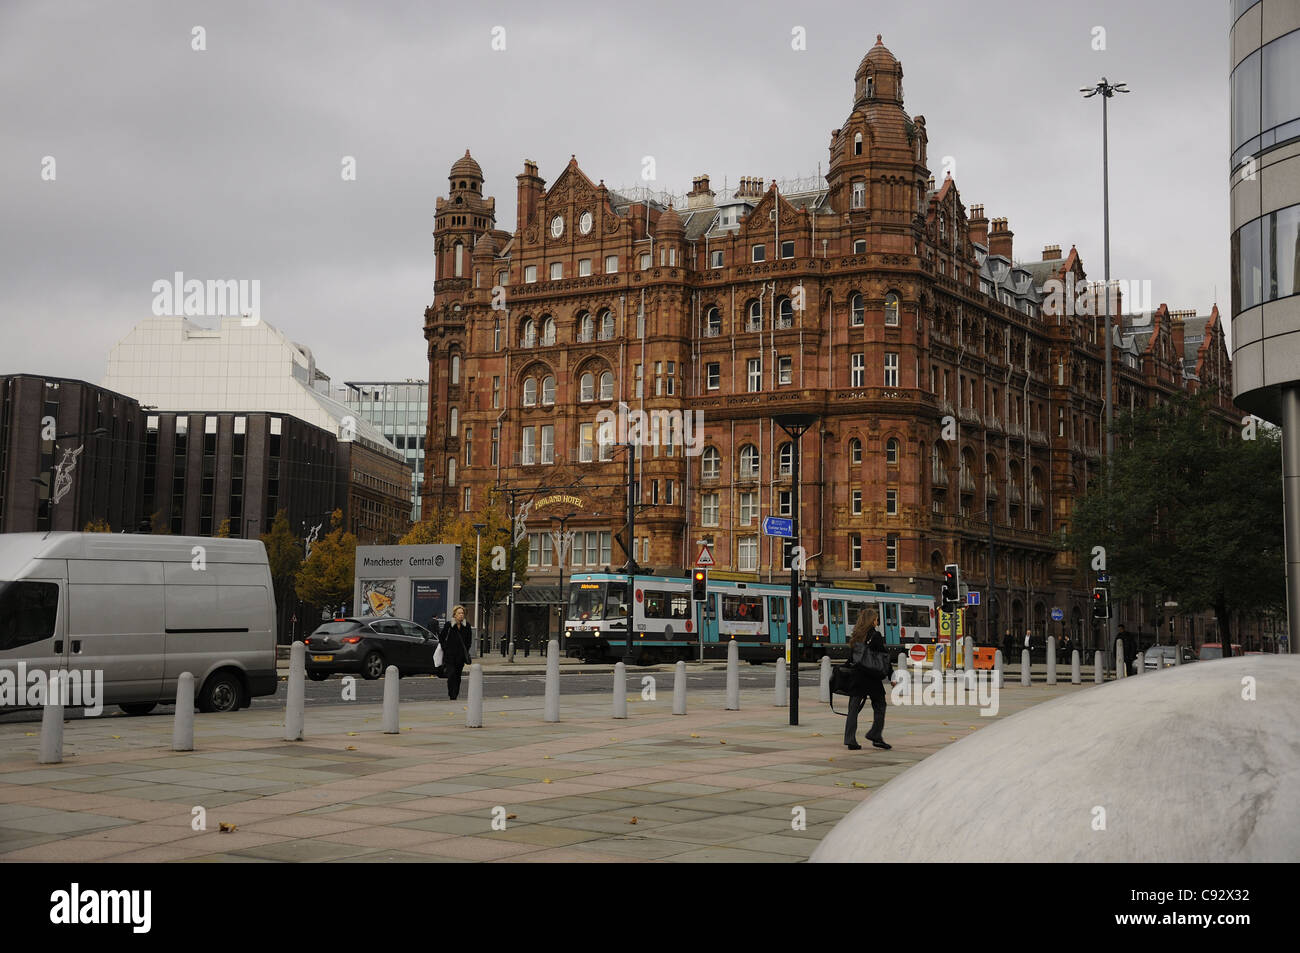 Metrolink poppy decorated tram in front of Midland Hotel Manchester Stock Photo